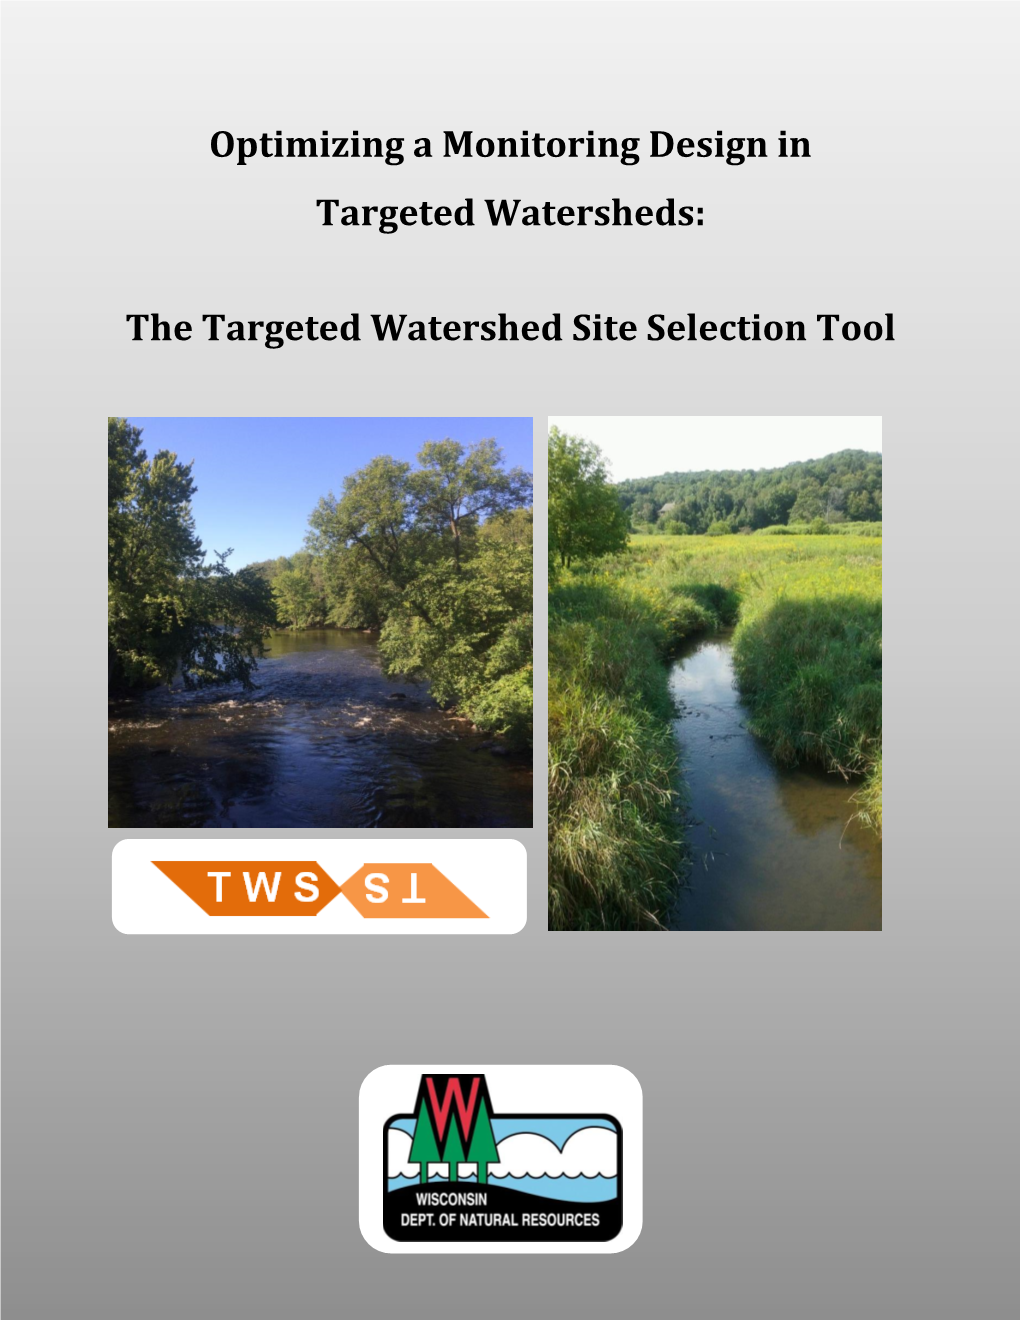 The Targeted Watershed Site Selection Tool